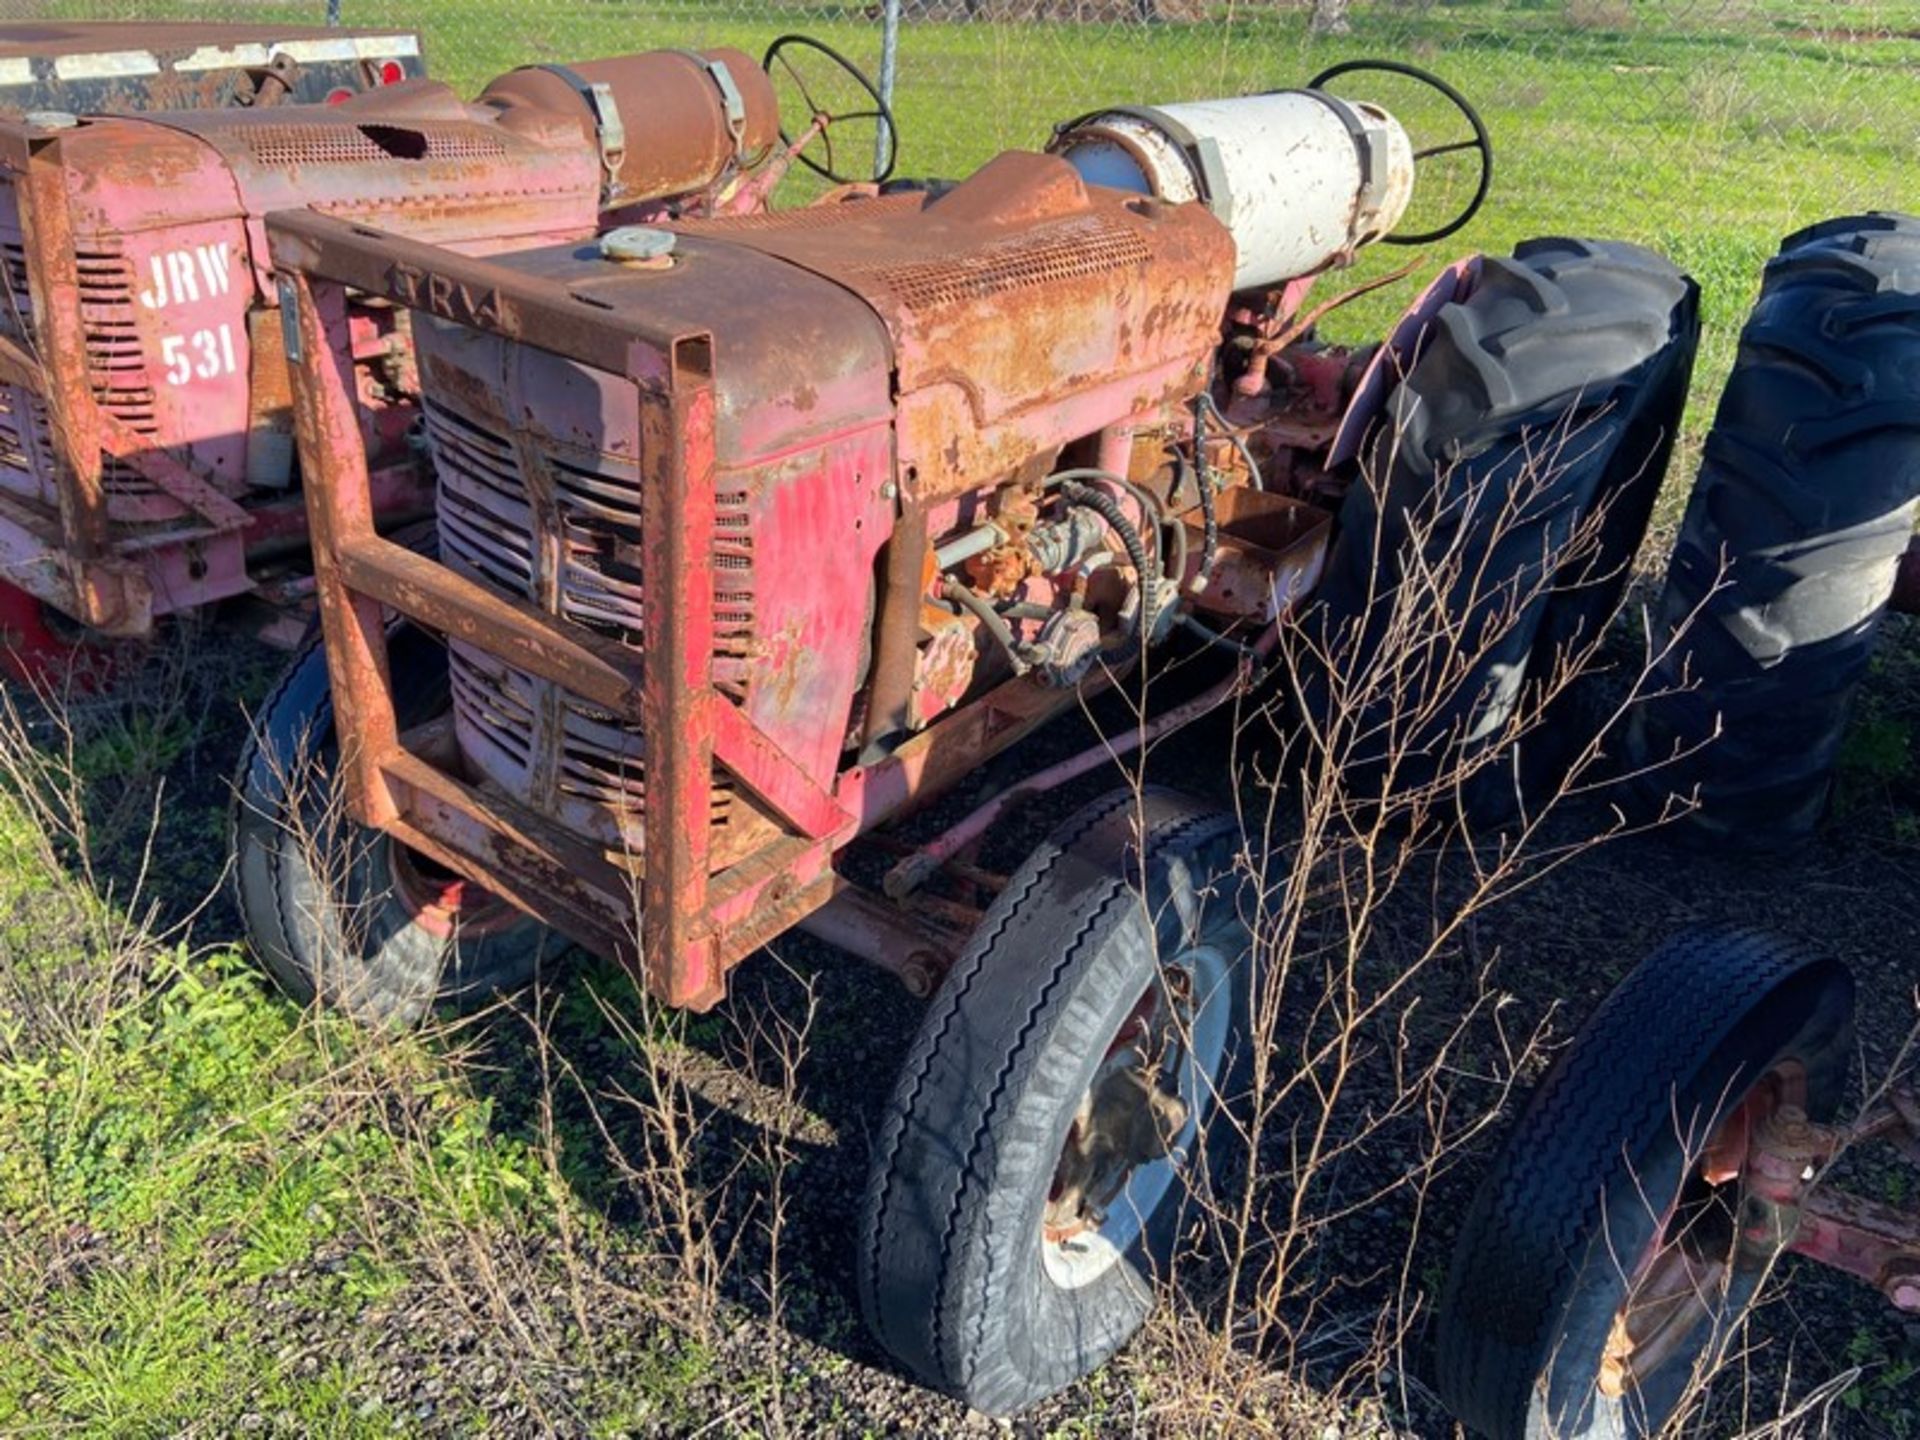 JRW Tractor (LOCATED IN ATWATER, CA)